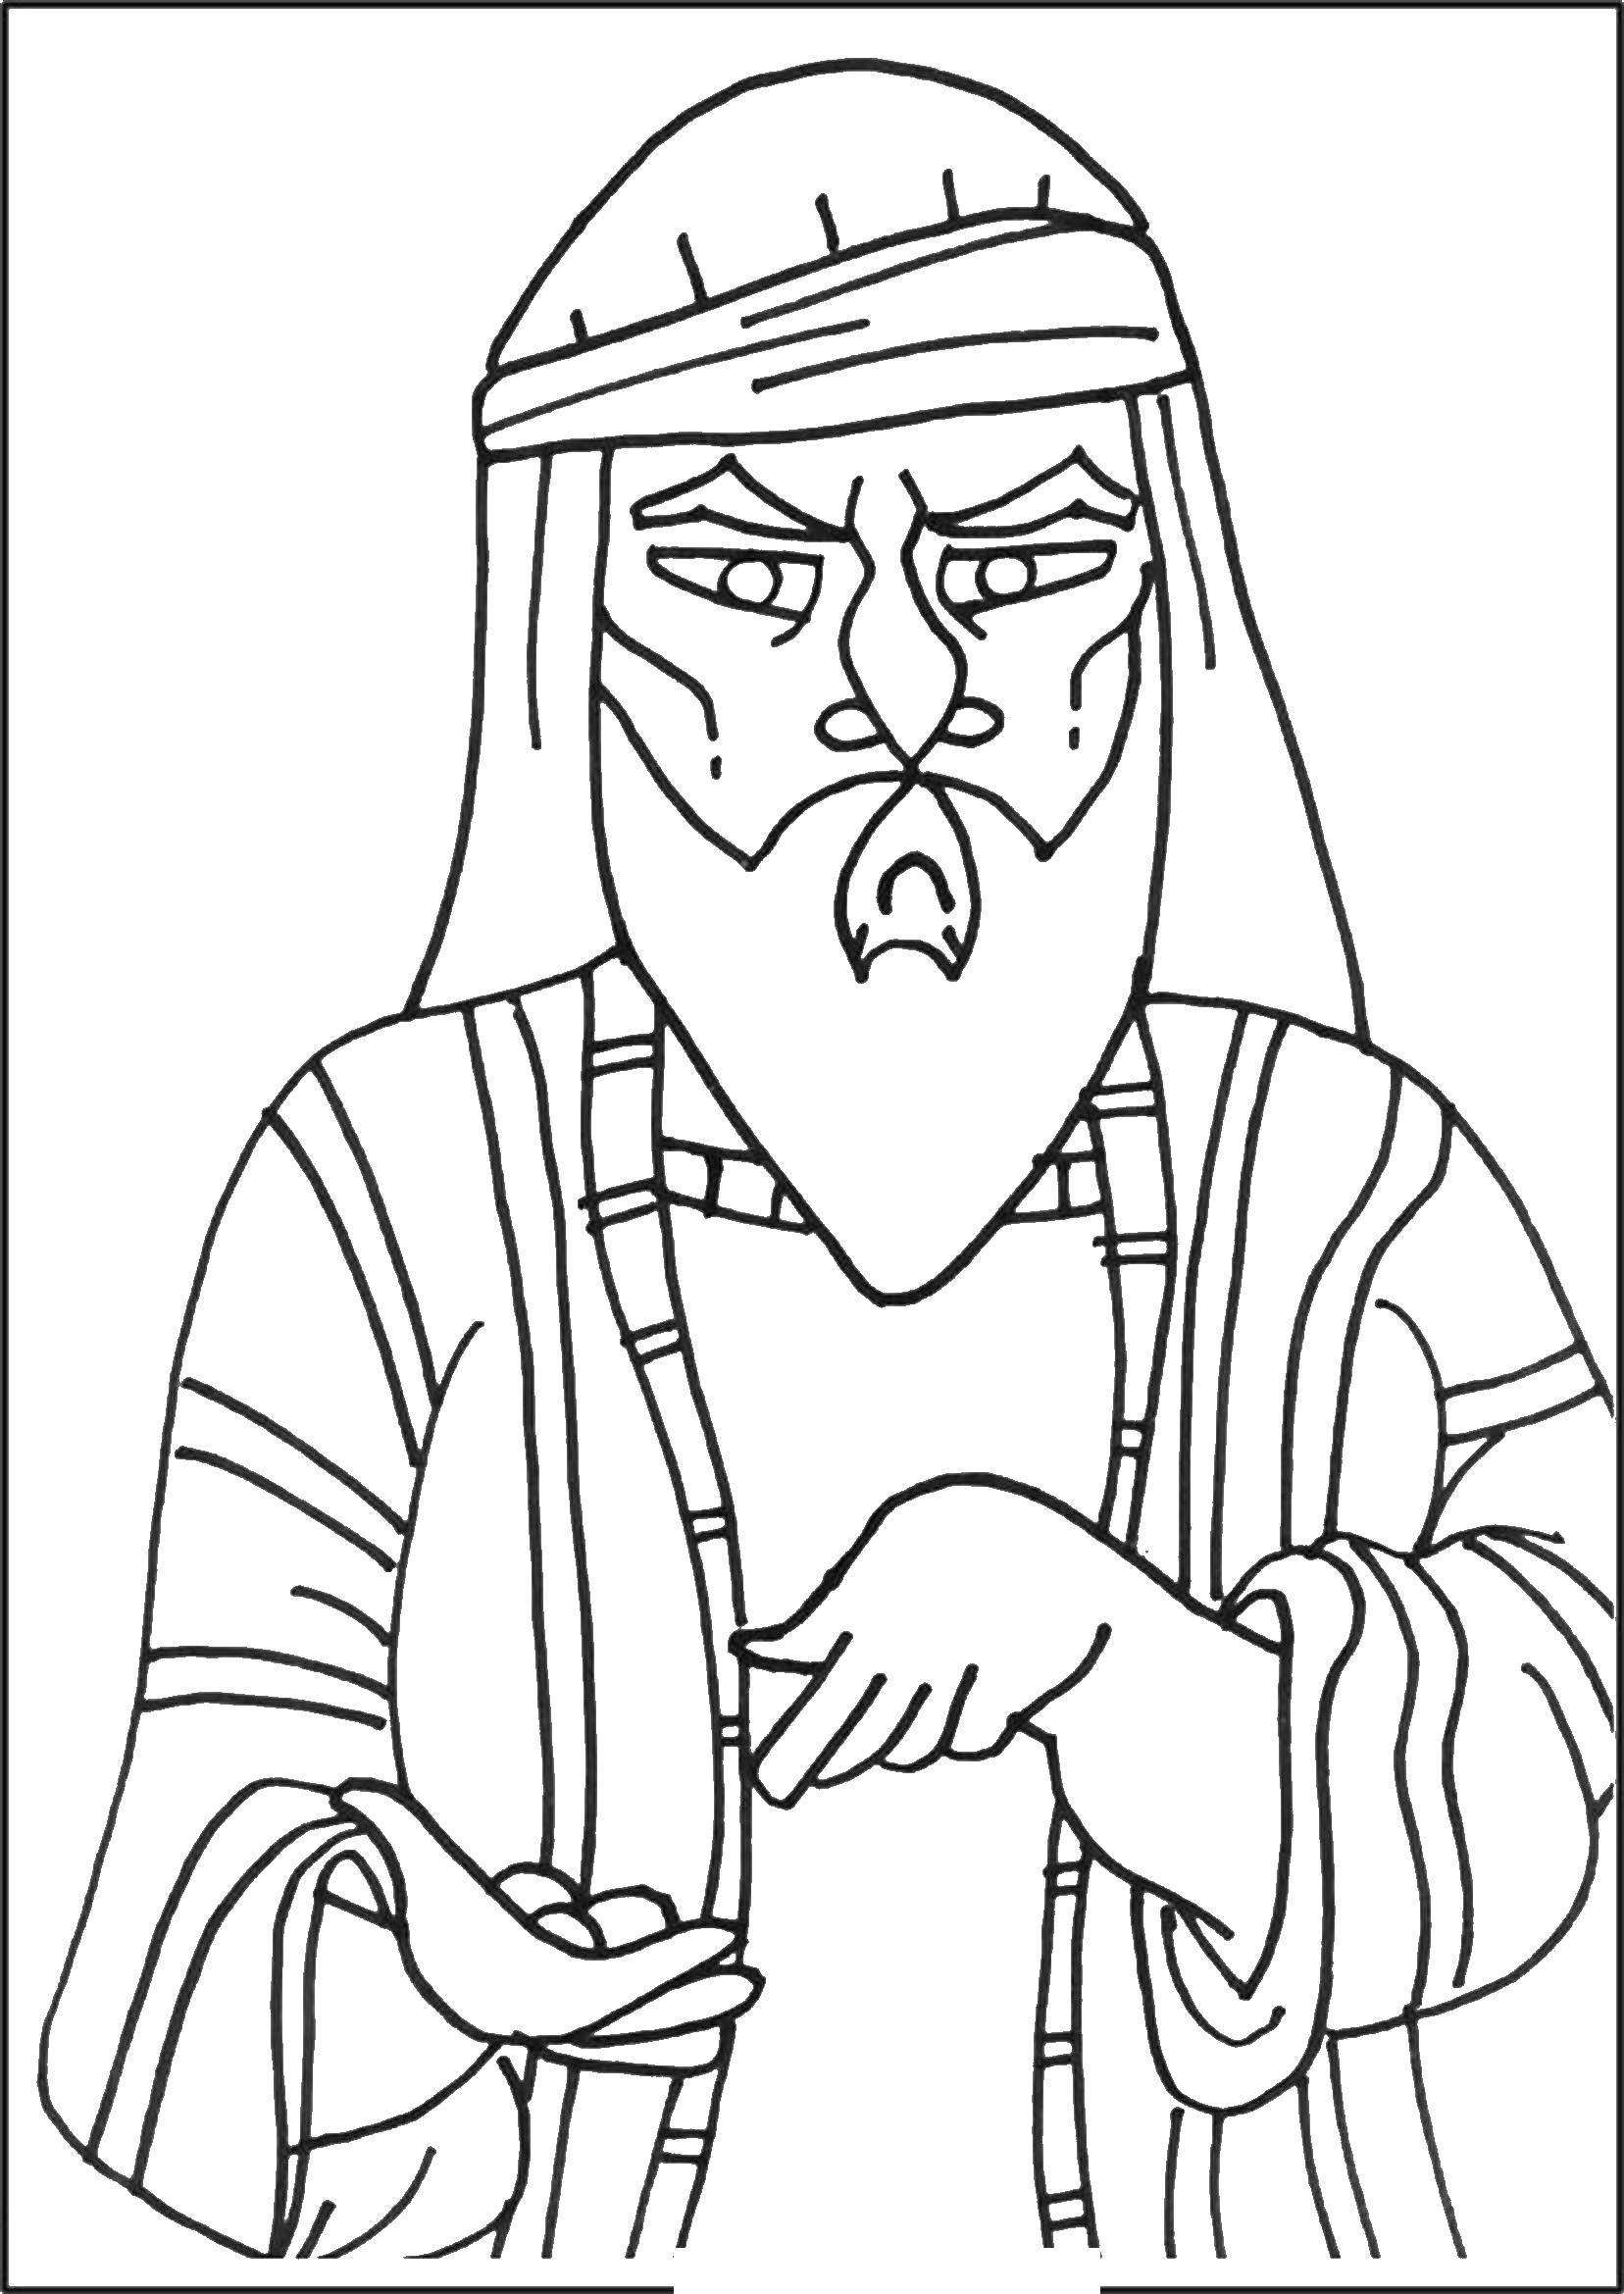 Coloring Christianity. Category the Bible. Tags:  Christianity, The Bible.